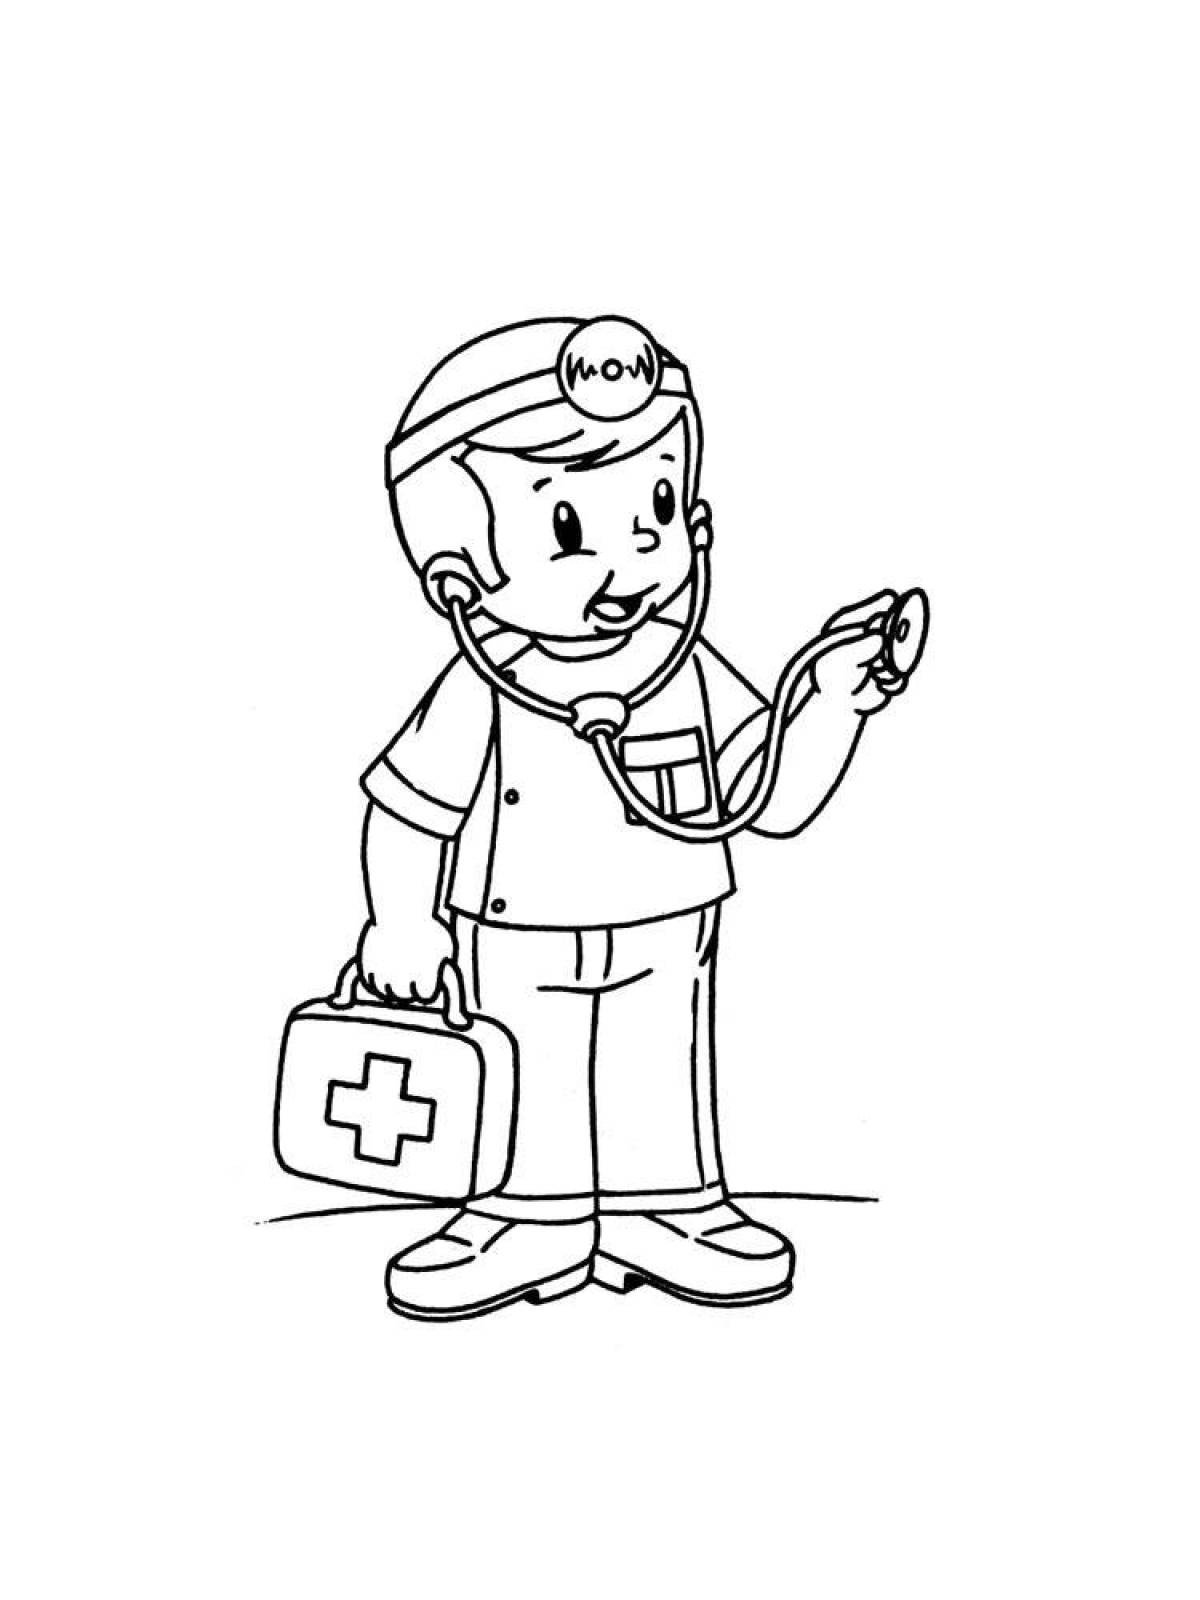 Creative doctor coloring book for kids